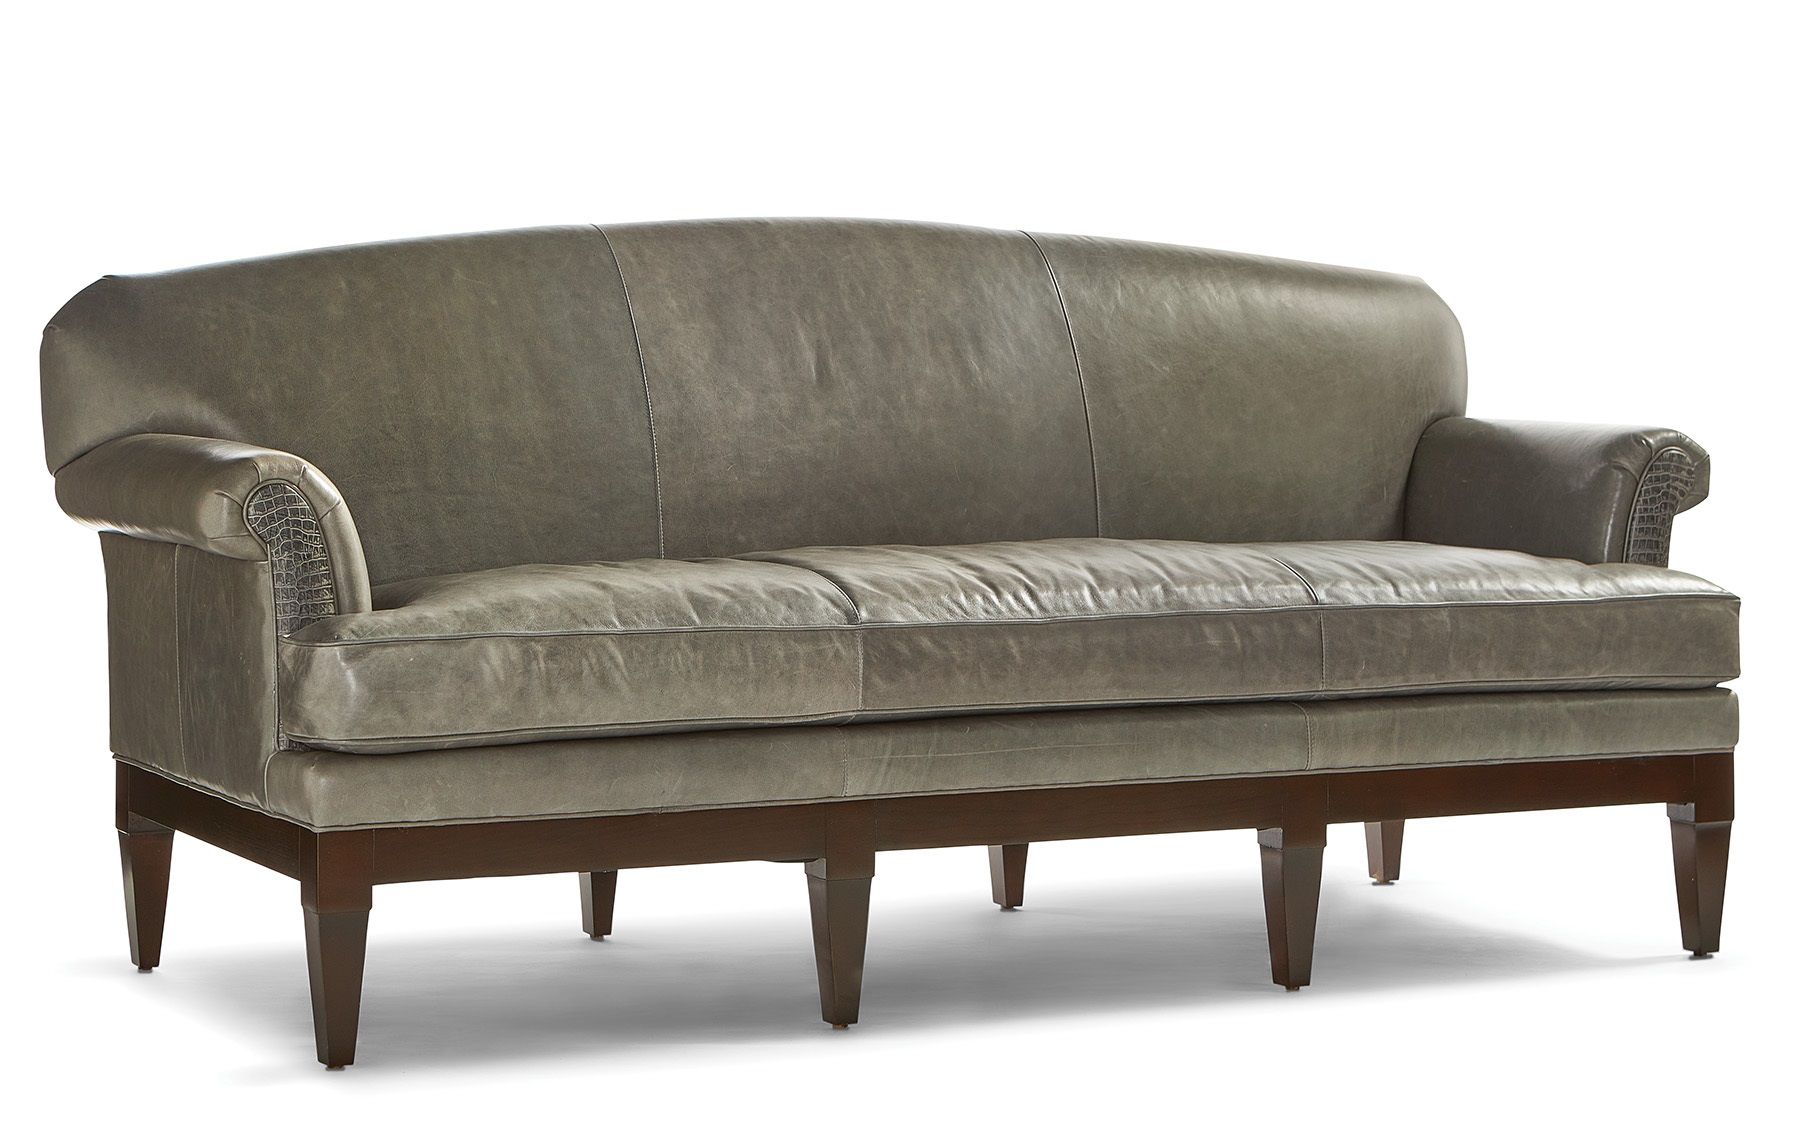 Julia Sofa is a highly sophisticated piece of furniture with cushioned seating and subtle color tones